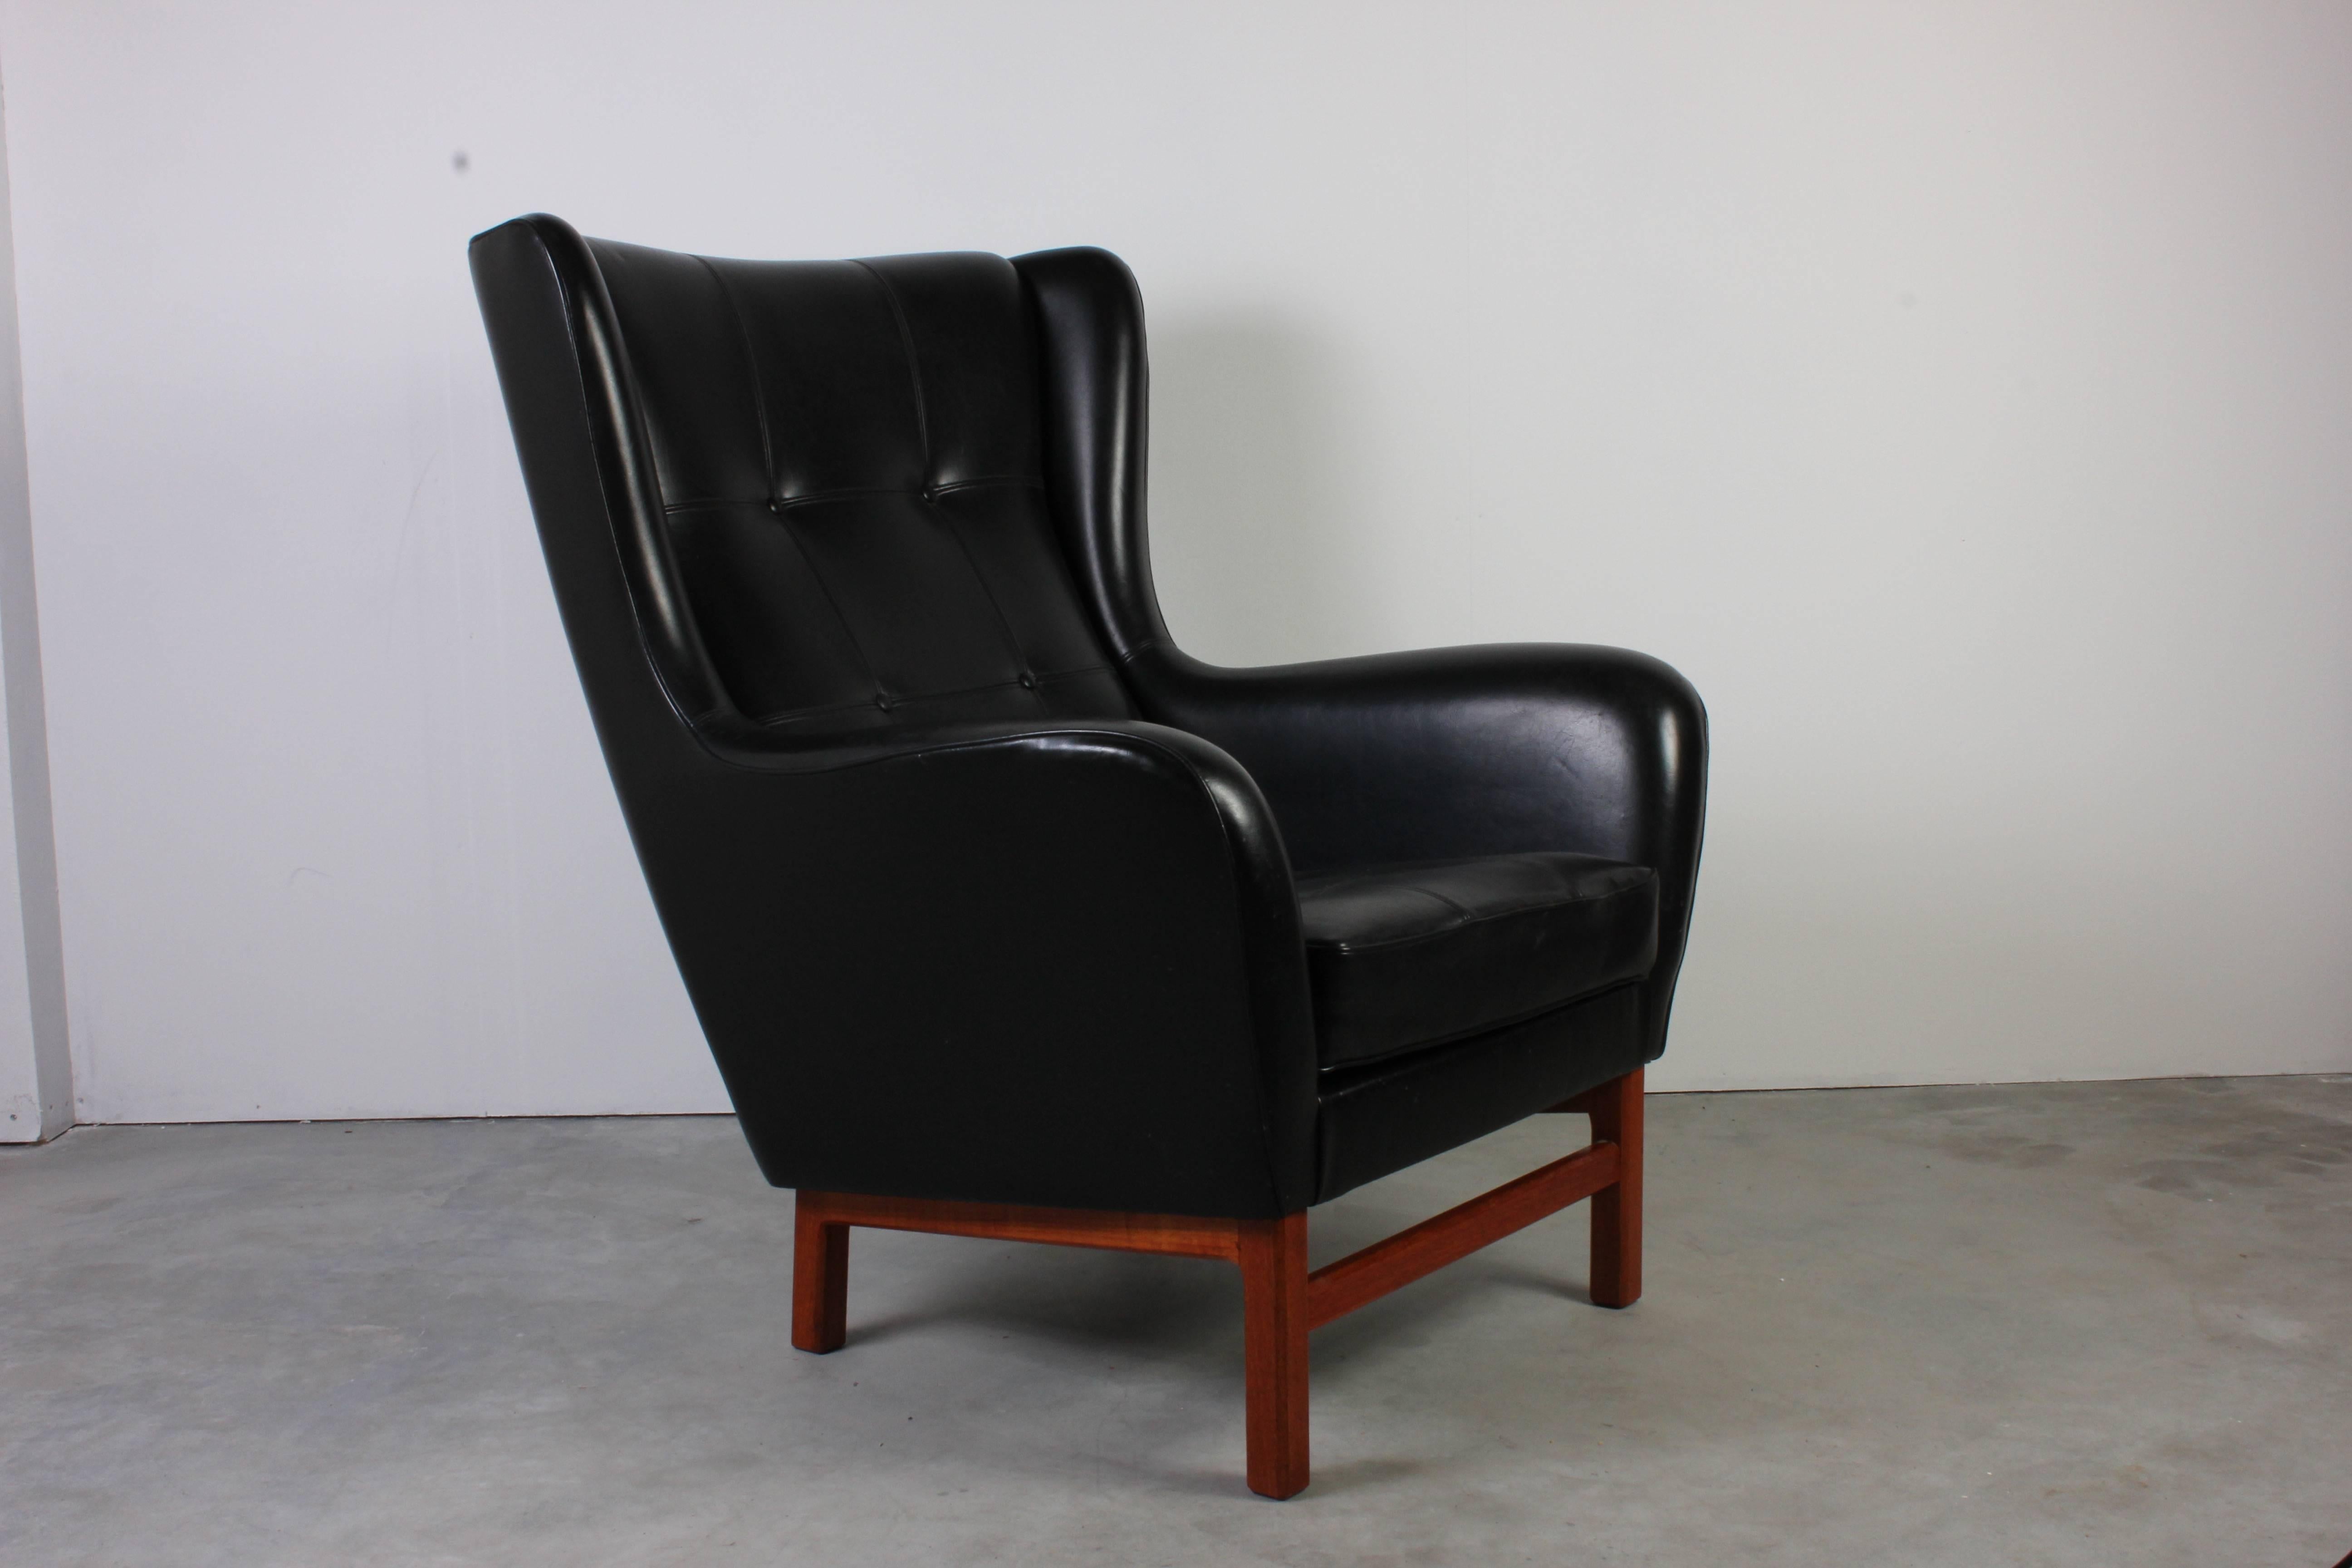 Large midcentury lounge chair by Swedish manufacturer Bröderna Andersson. The chair has vinyl upholstery and teak legs. The chair is in very good vintage condition with minor signs of usage consistent with age and use.